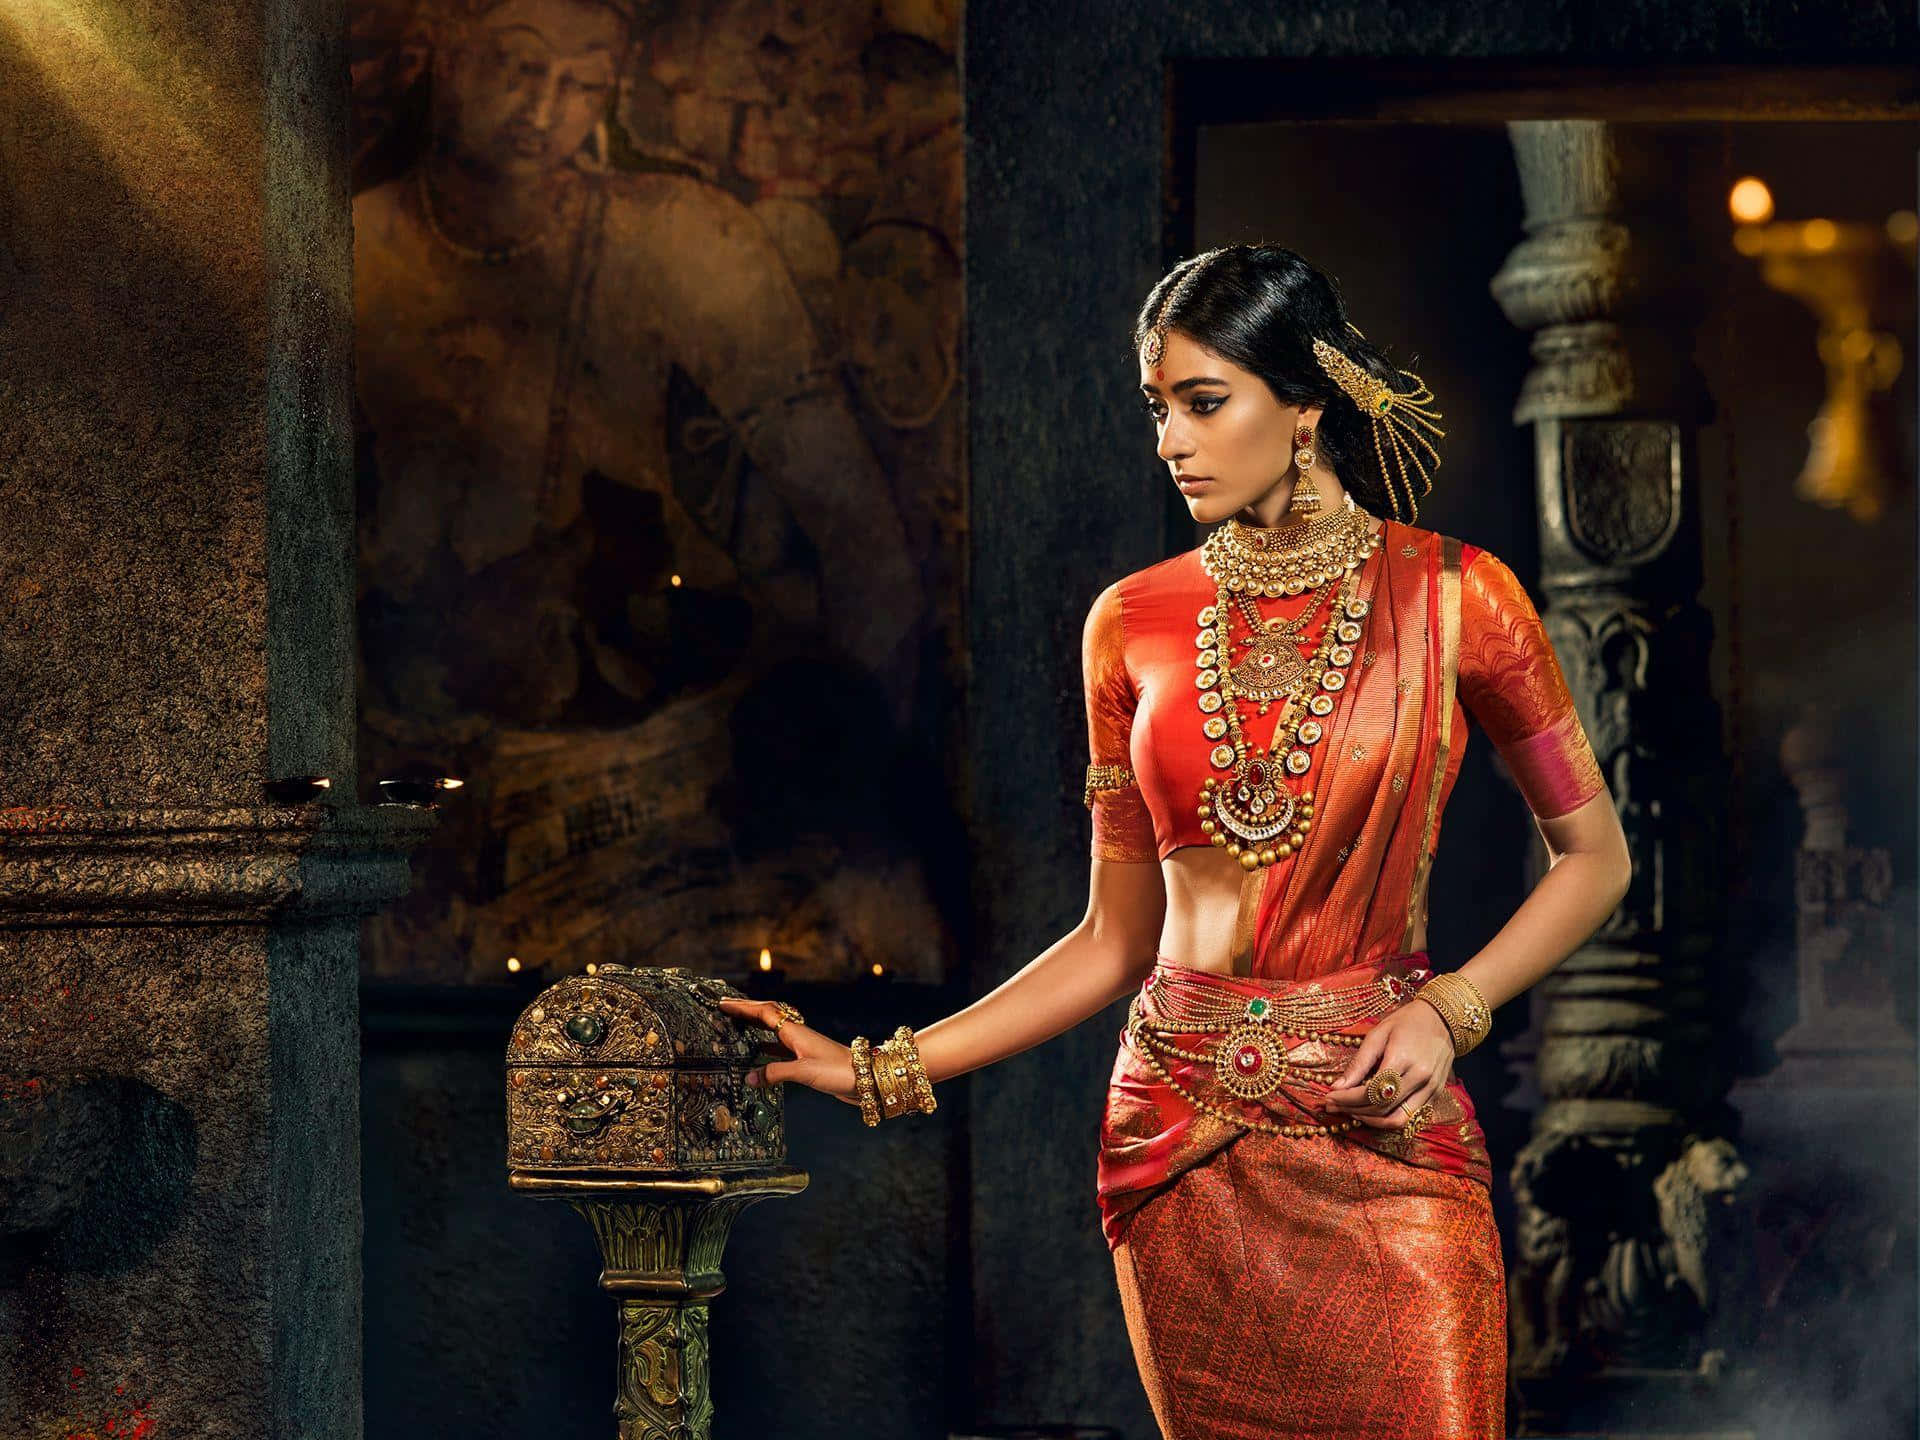 Indian Woman With Red Sari Jewelry Photoshoot Wallpaper